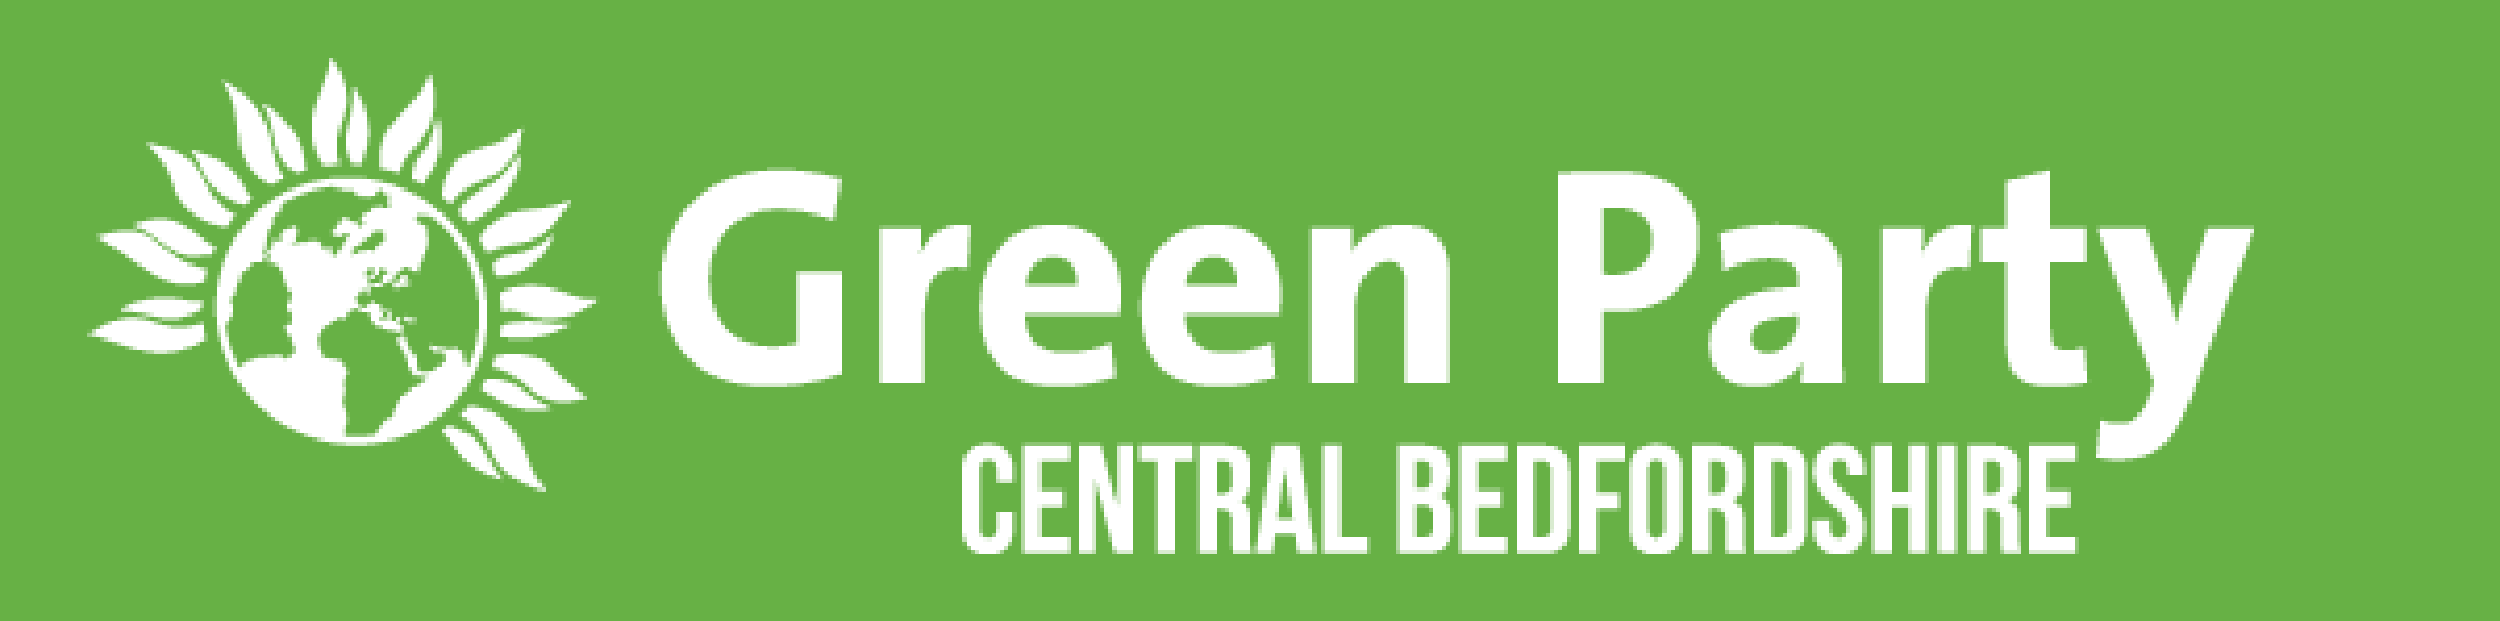 Central Bedsfordshire Branding Image